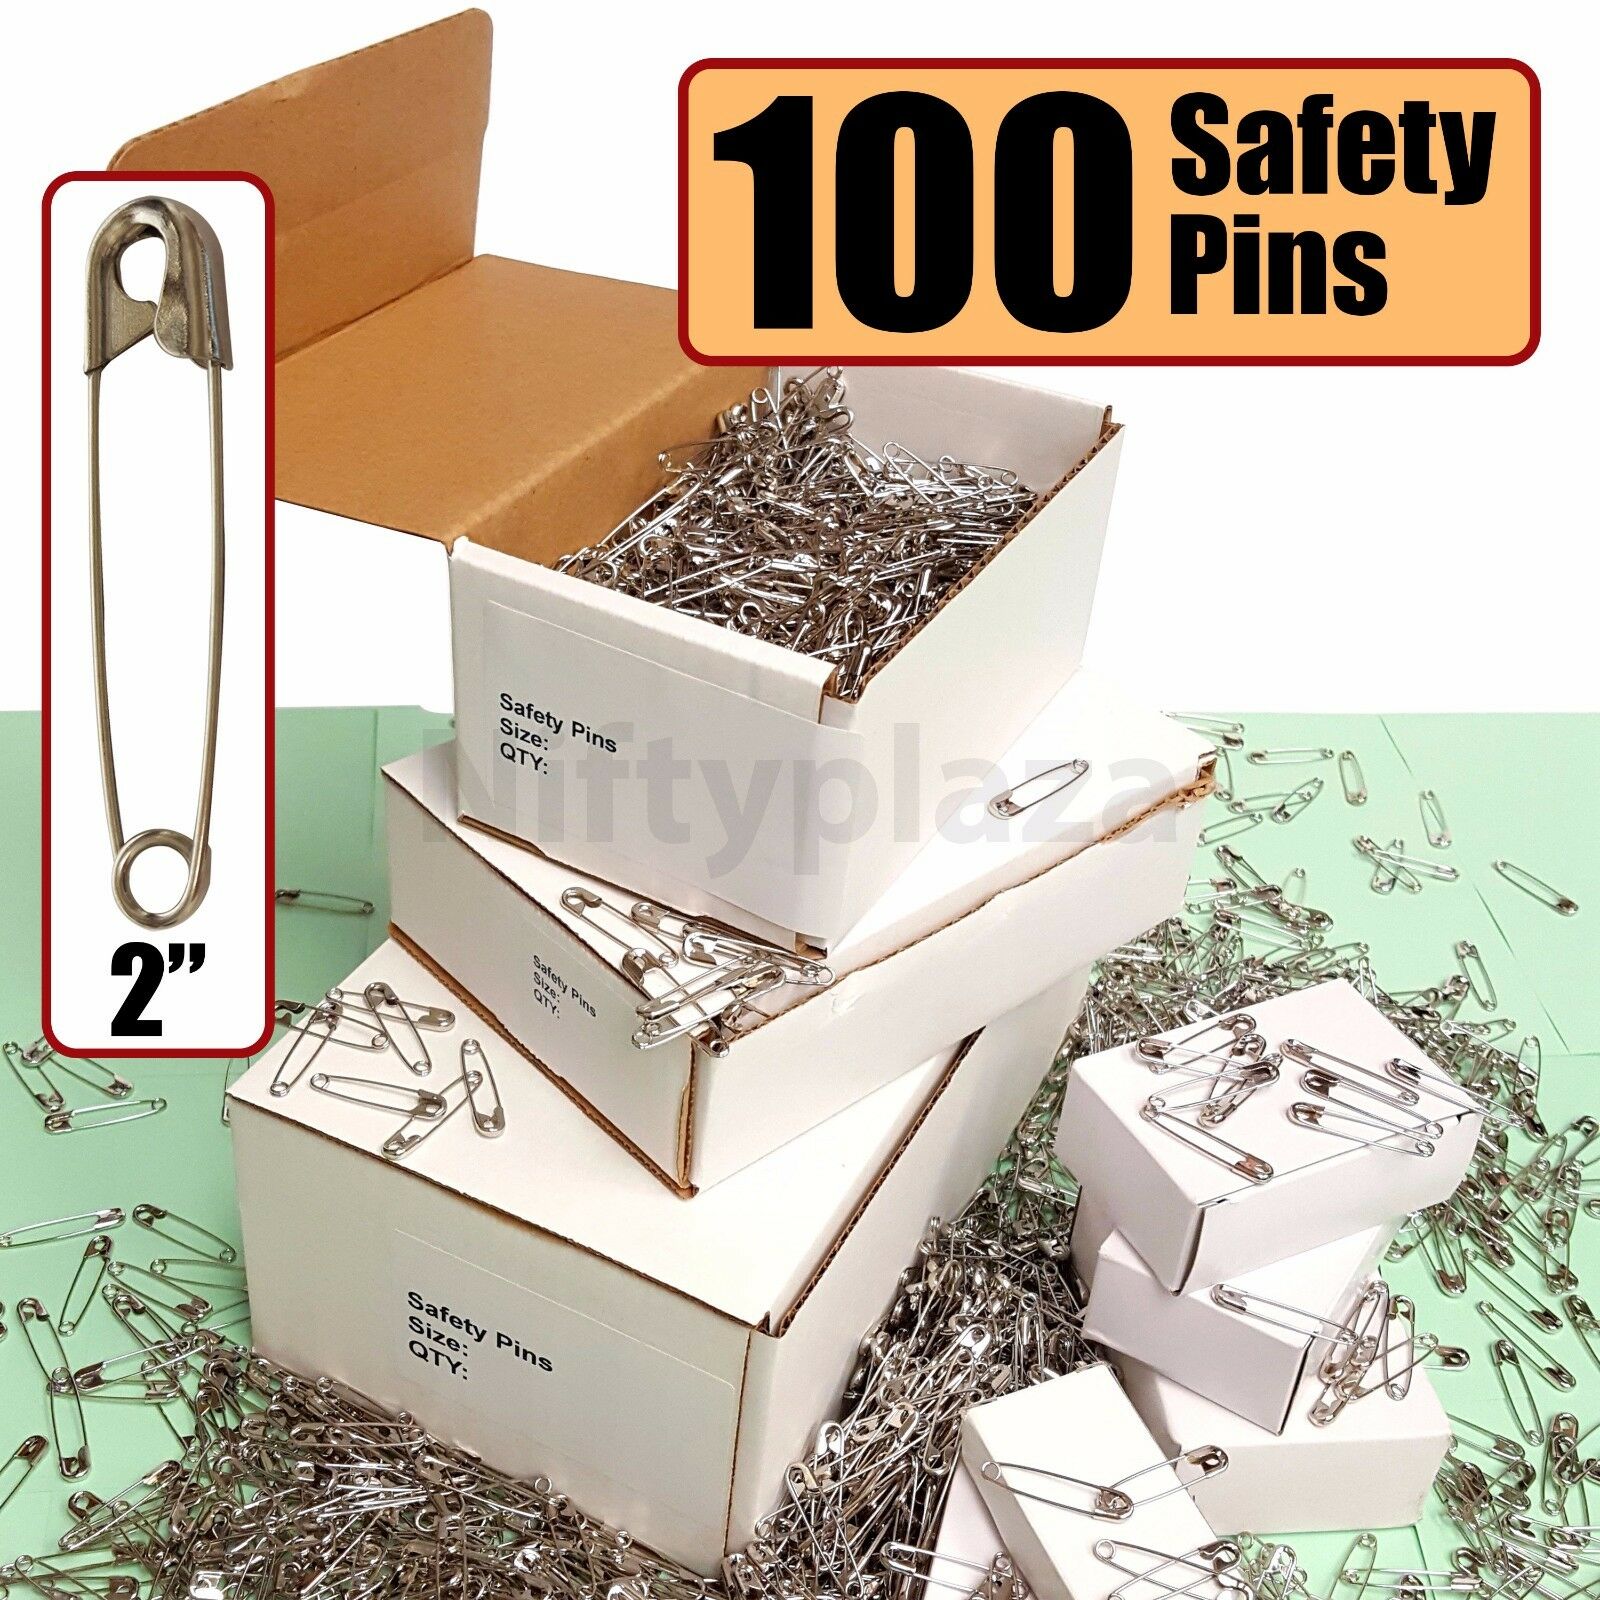 Niftyplaza 100 Extra Large Safety Pins Size 2" Quilters Crafting Diapers Sewing